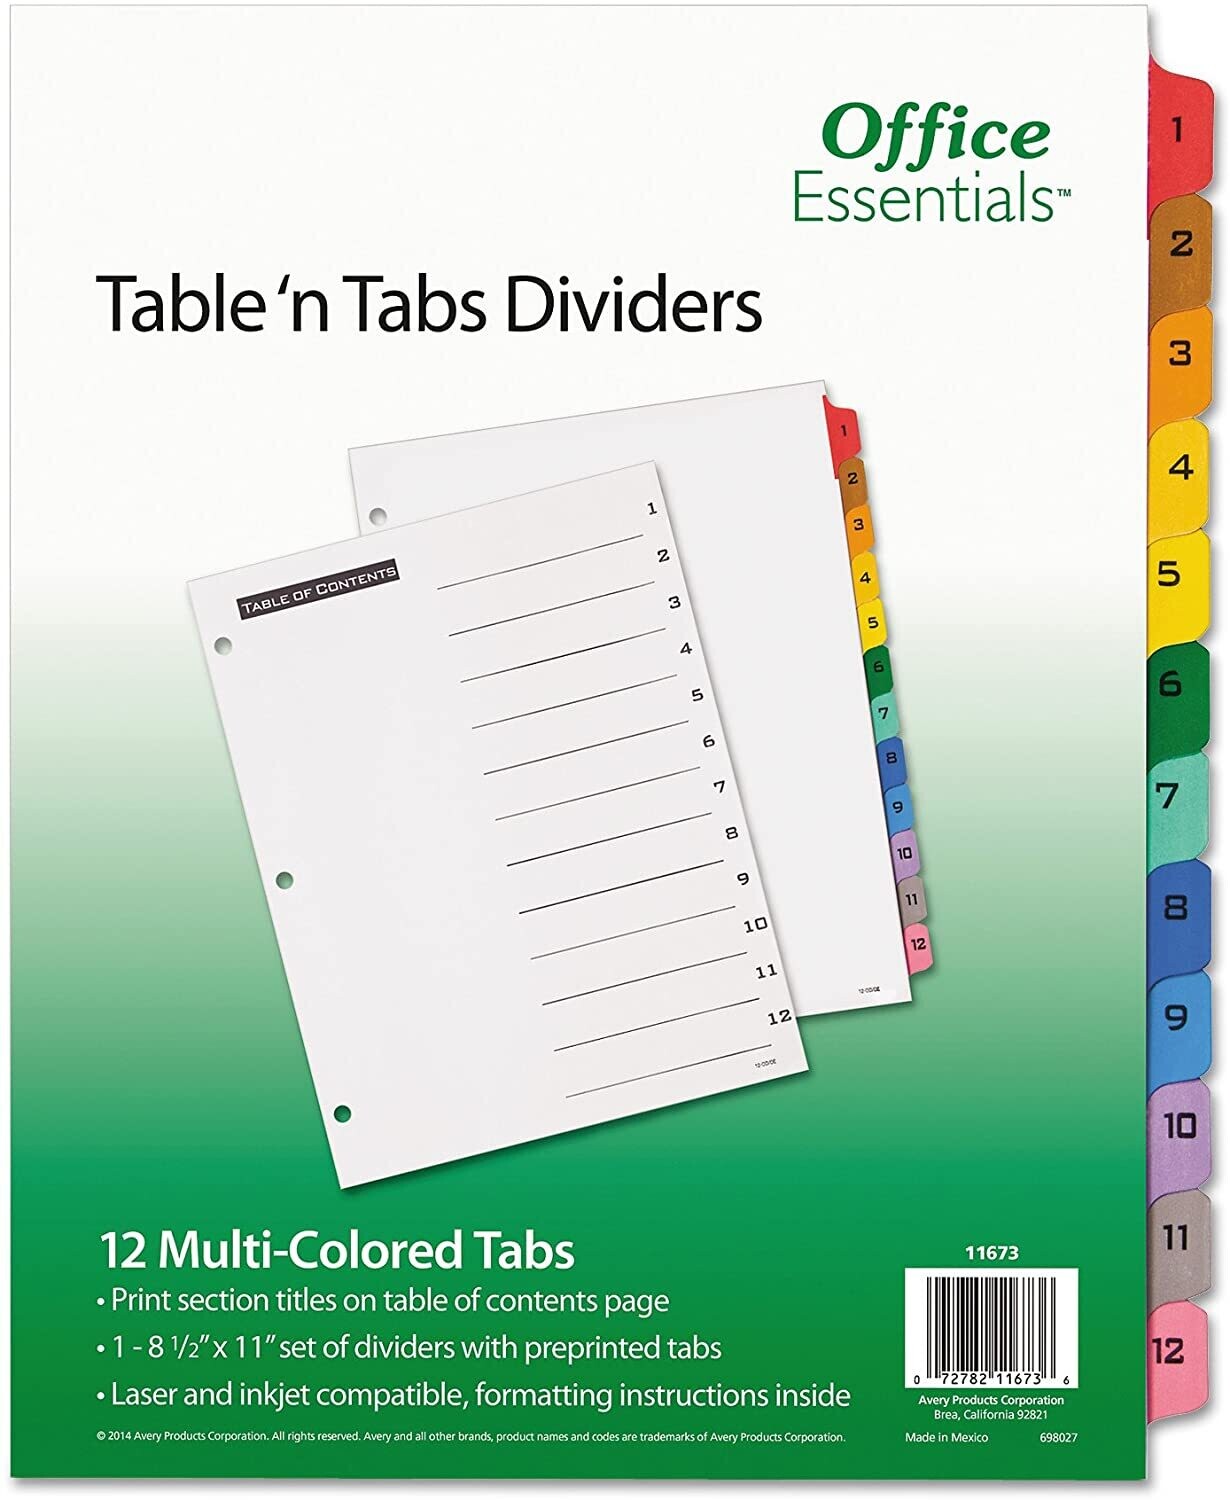 Dividers 1-12 Color Tabs (11673)